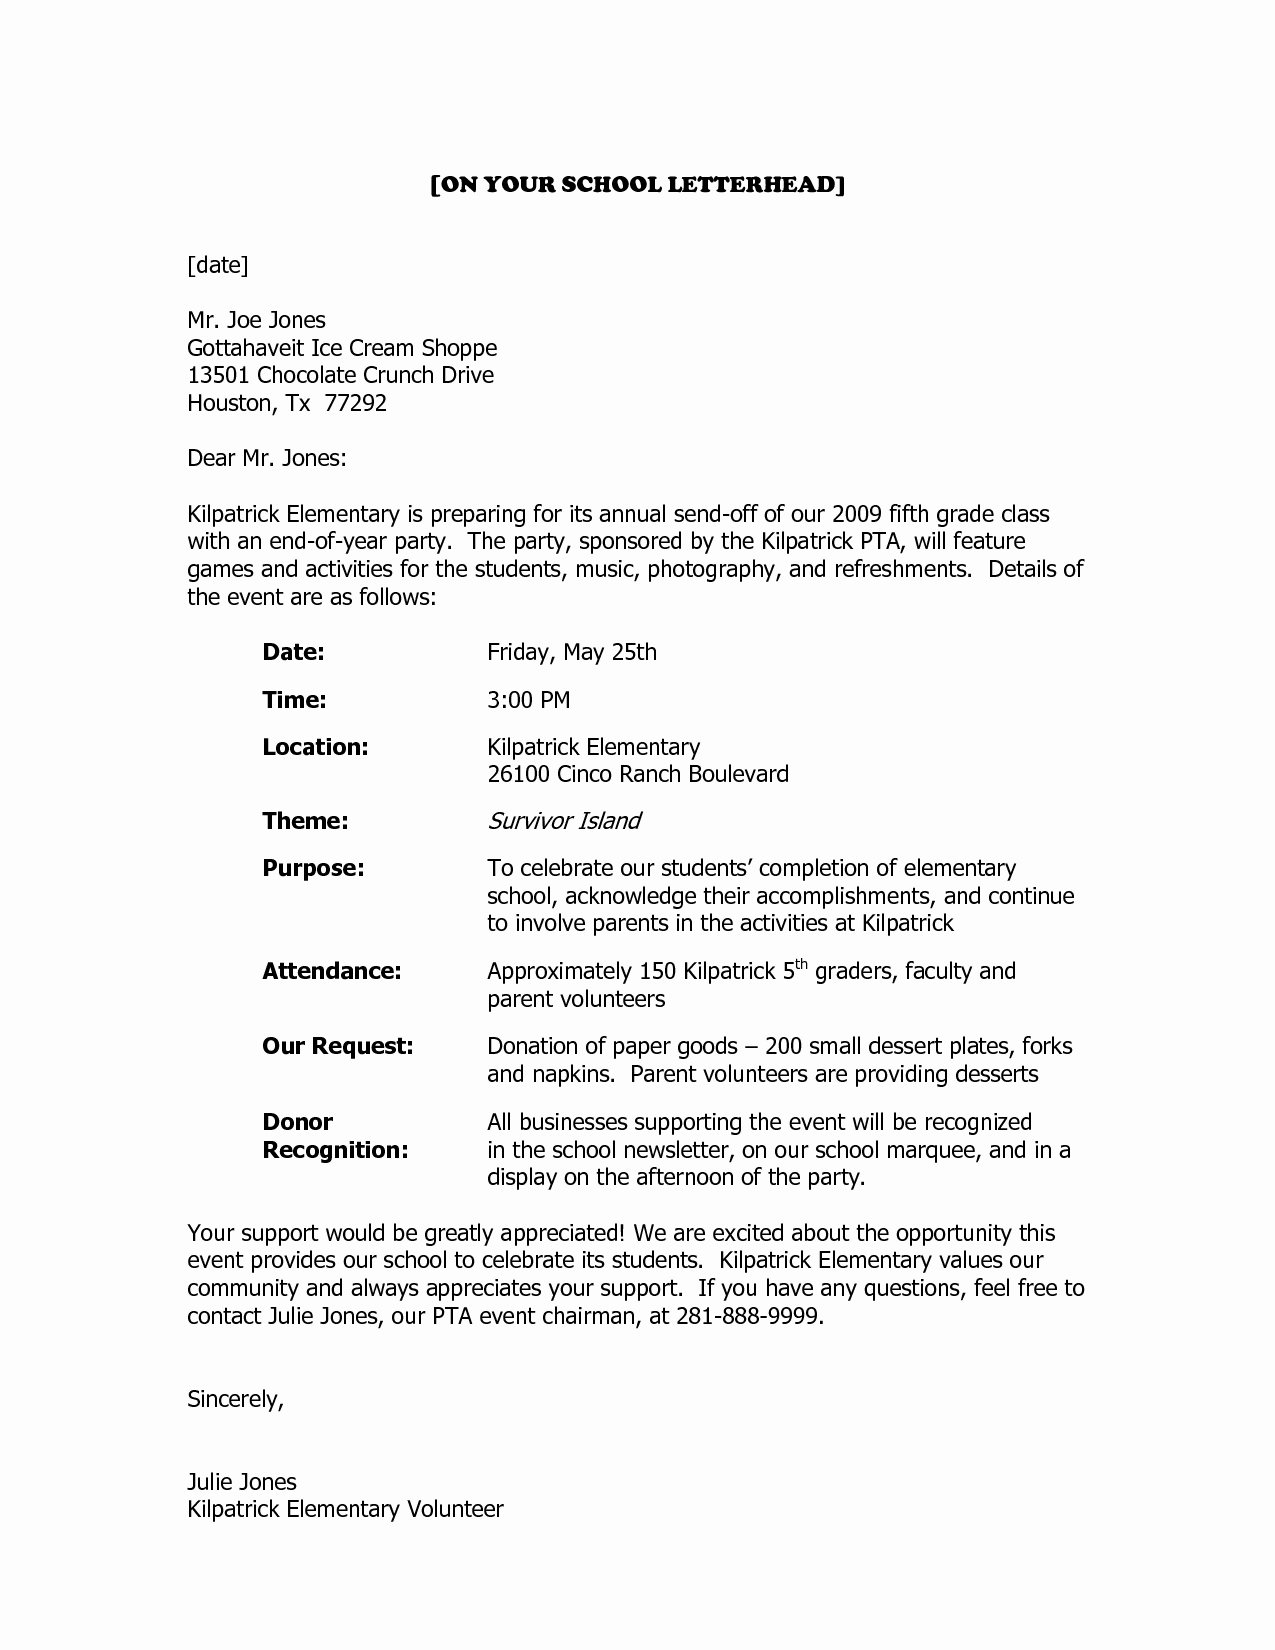 Letter Template asking for Donations